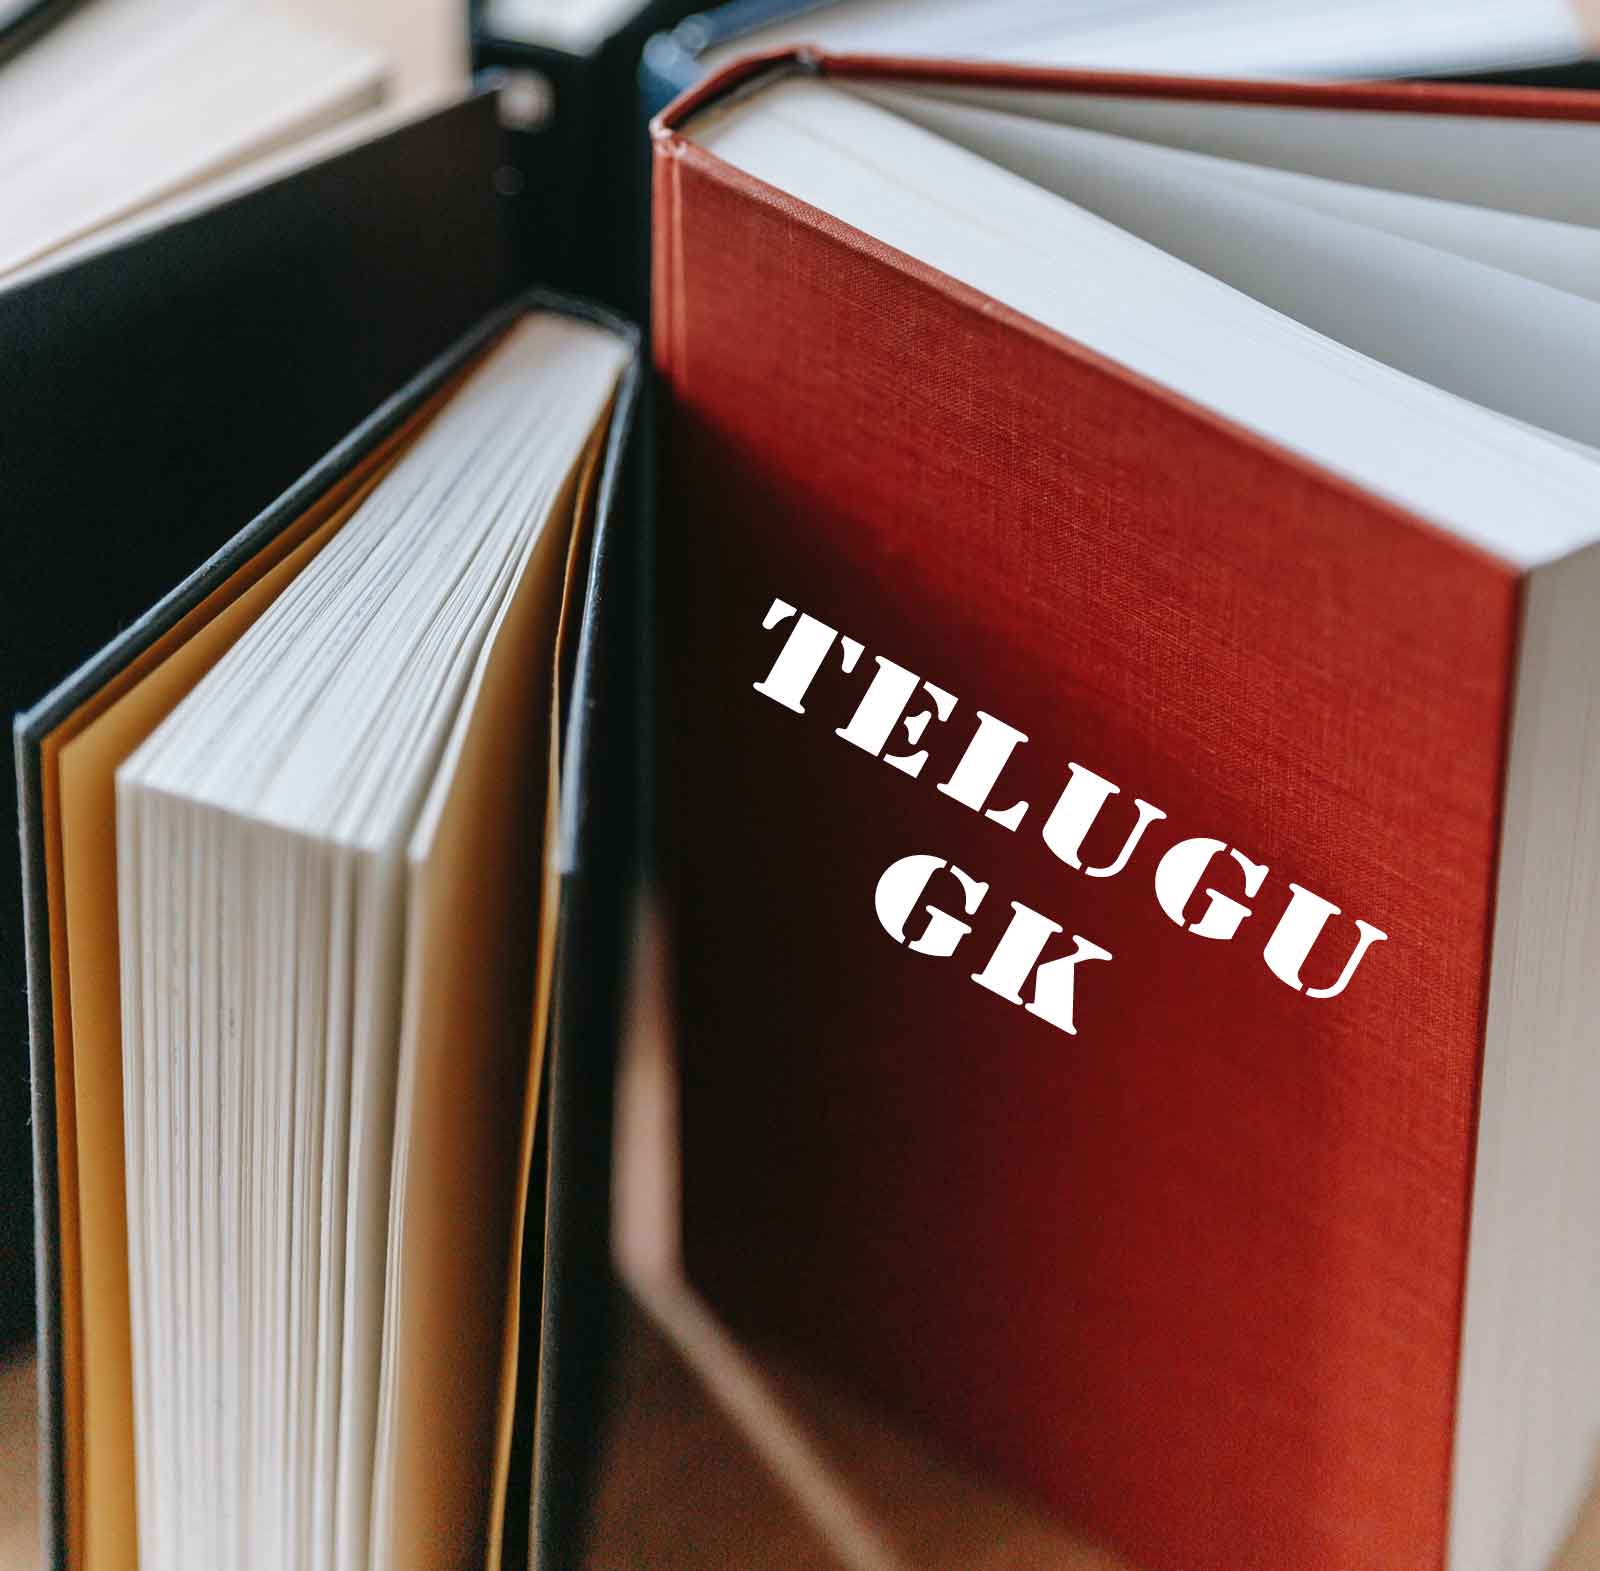 Telugu GK Selected Questions and Answers